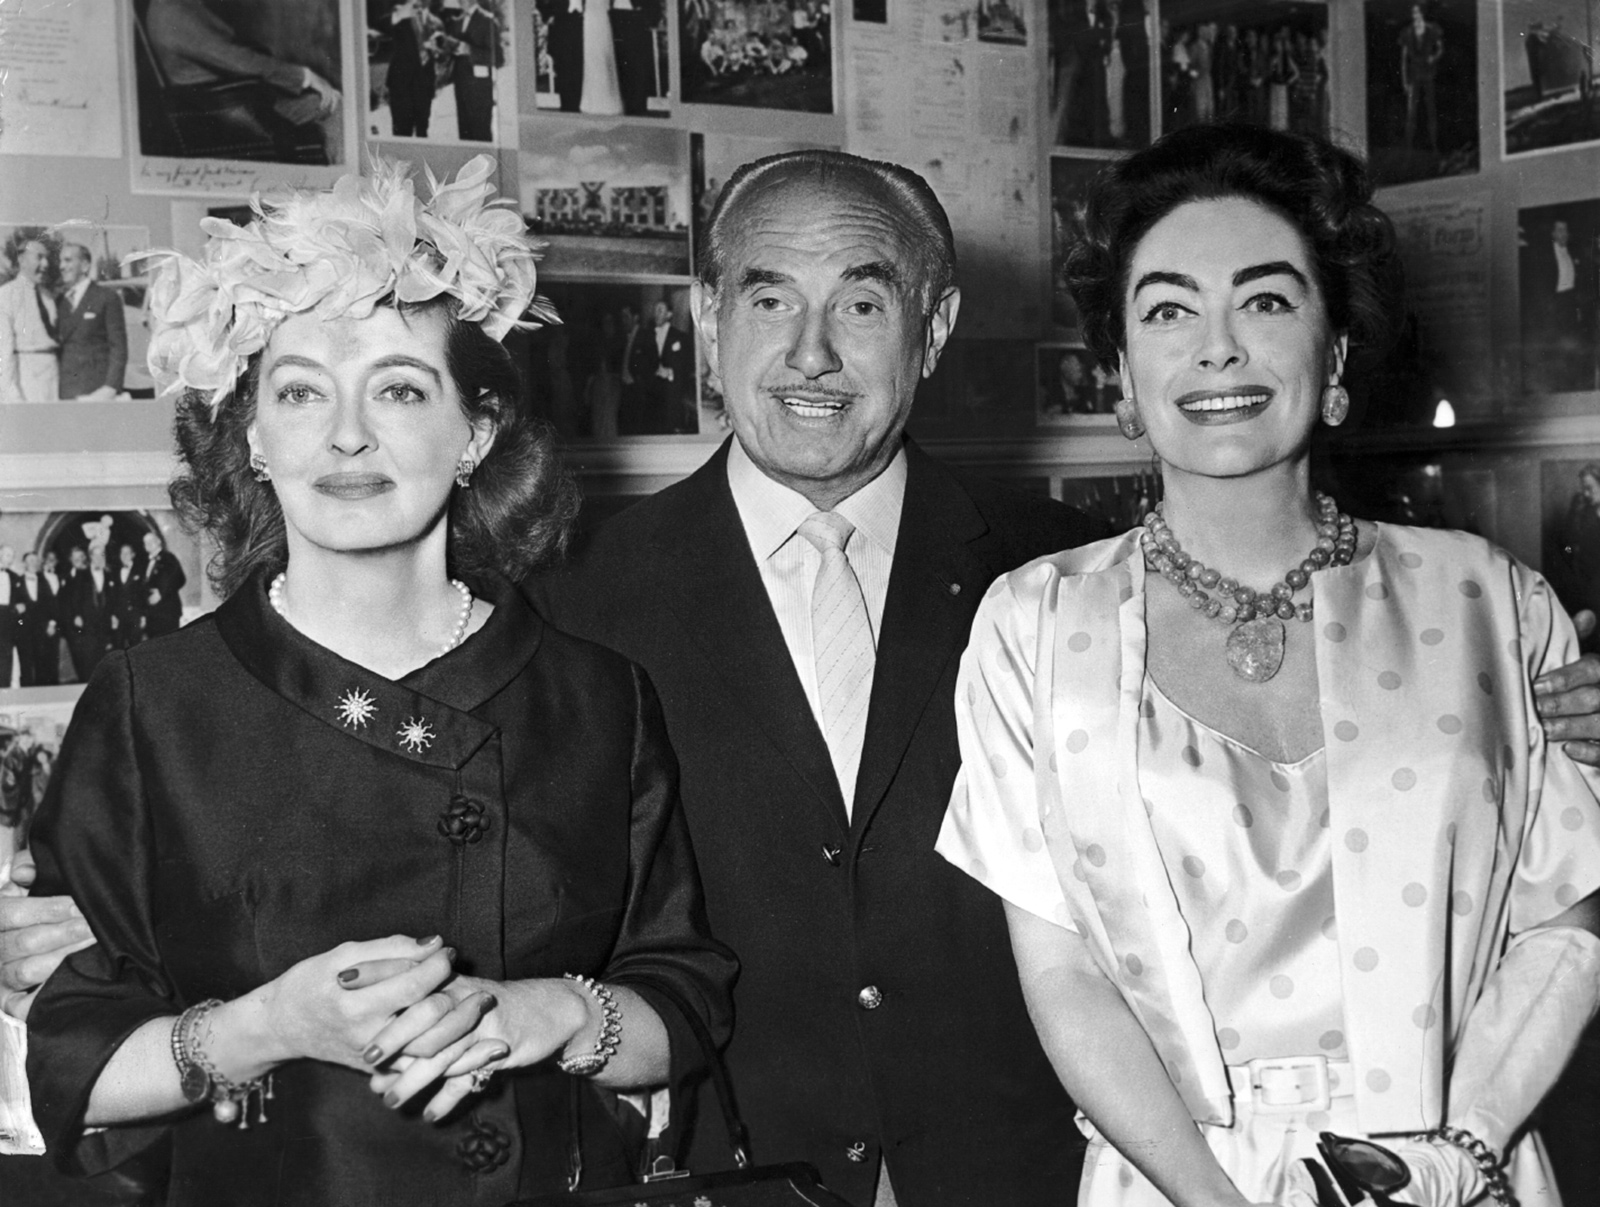 Jack Warner with Bette Davis and Joan Crawford, stars of the Warner Brothers film What Ever Happened to Baby Jane?, circa 1962